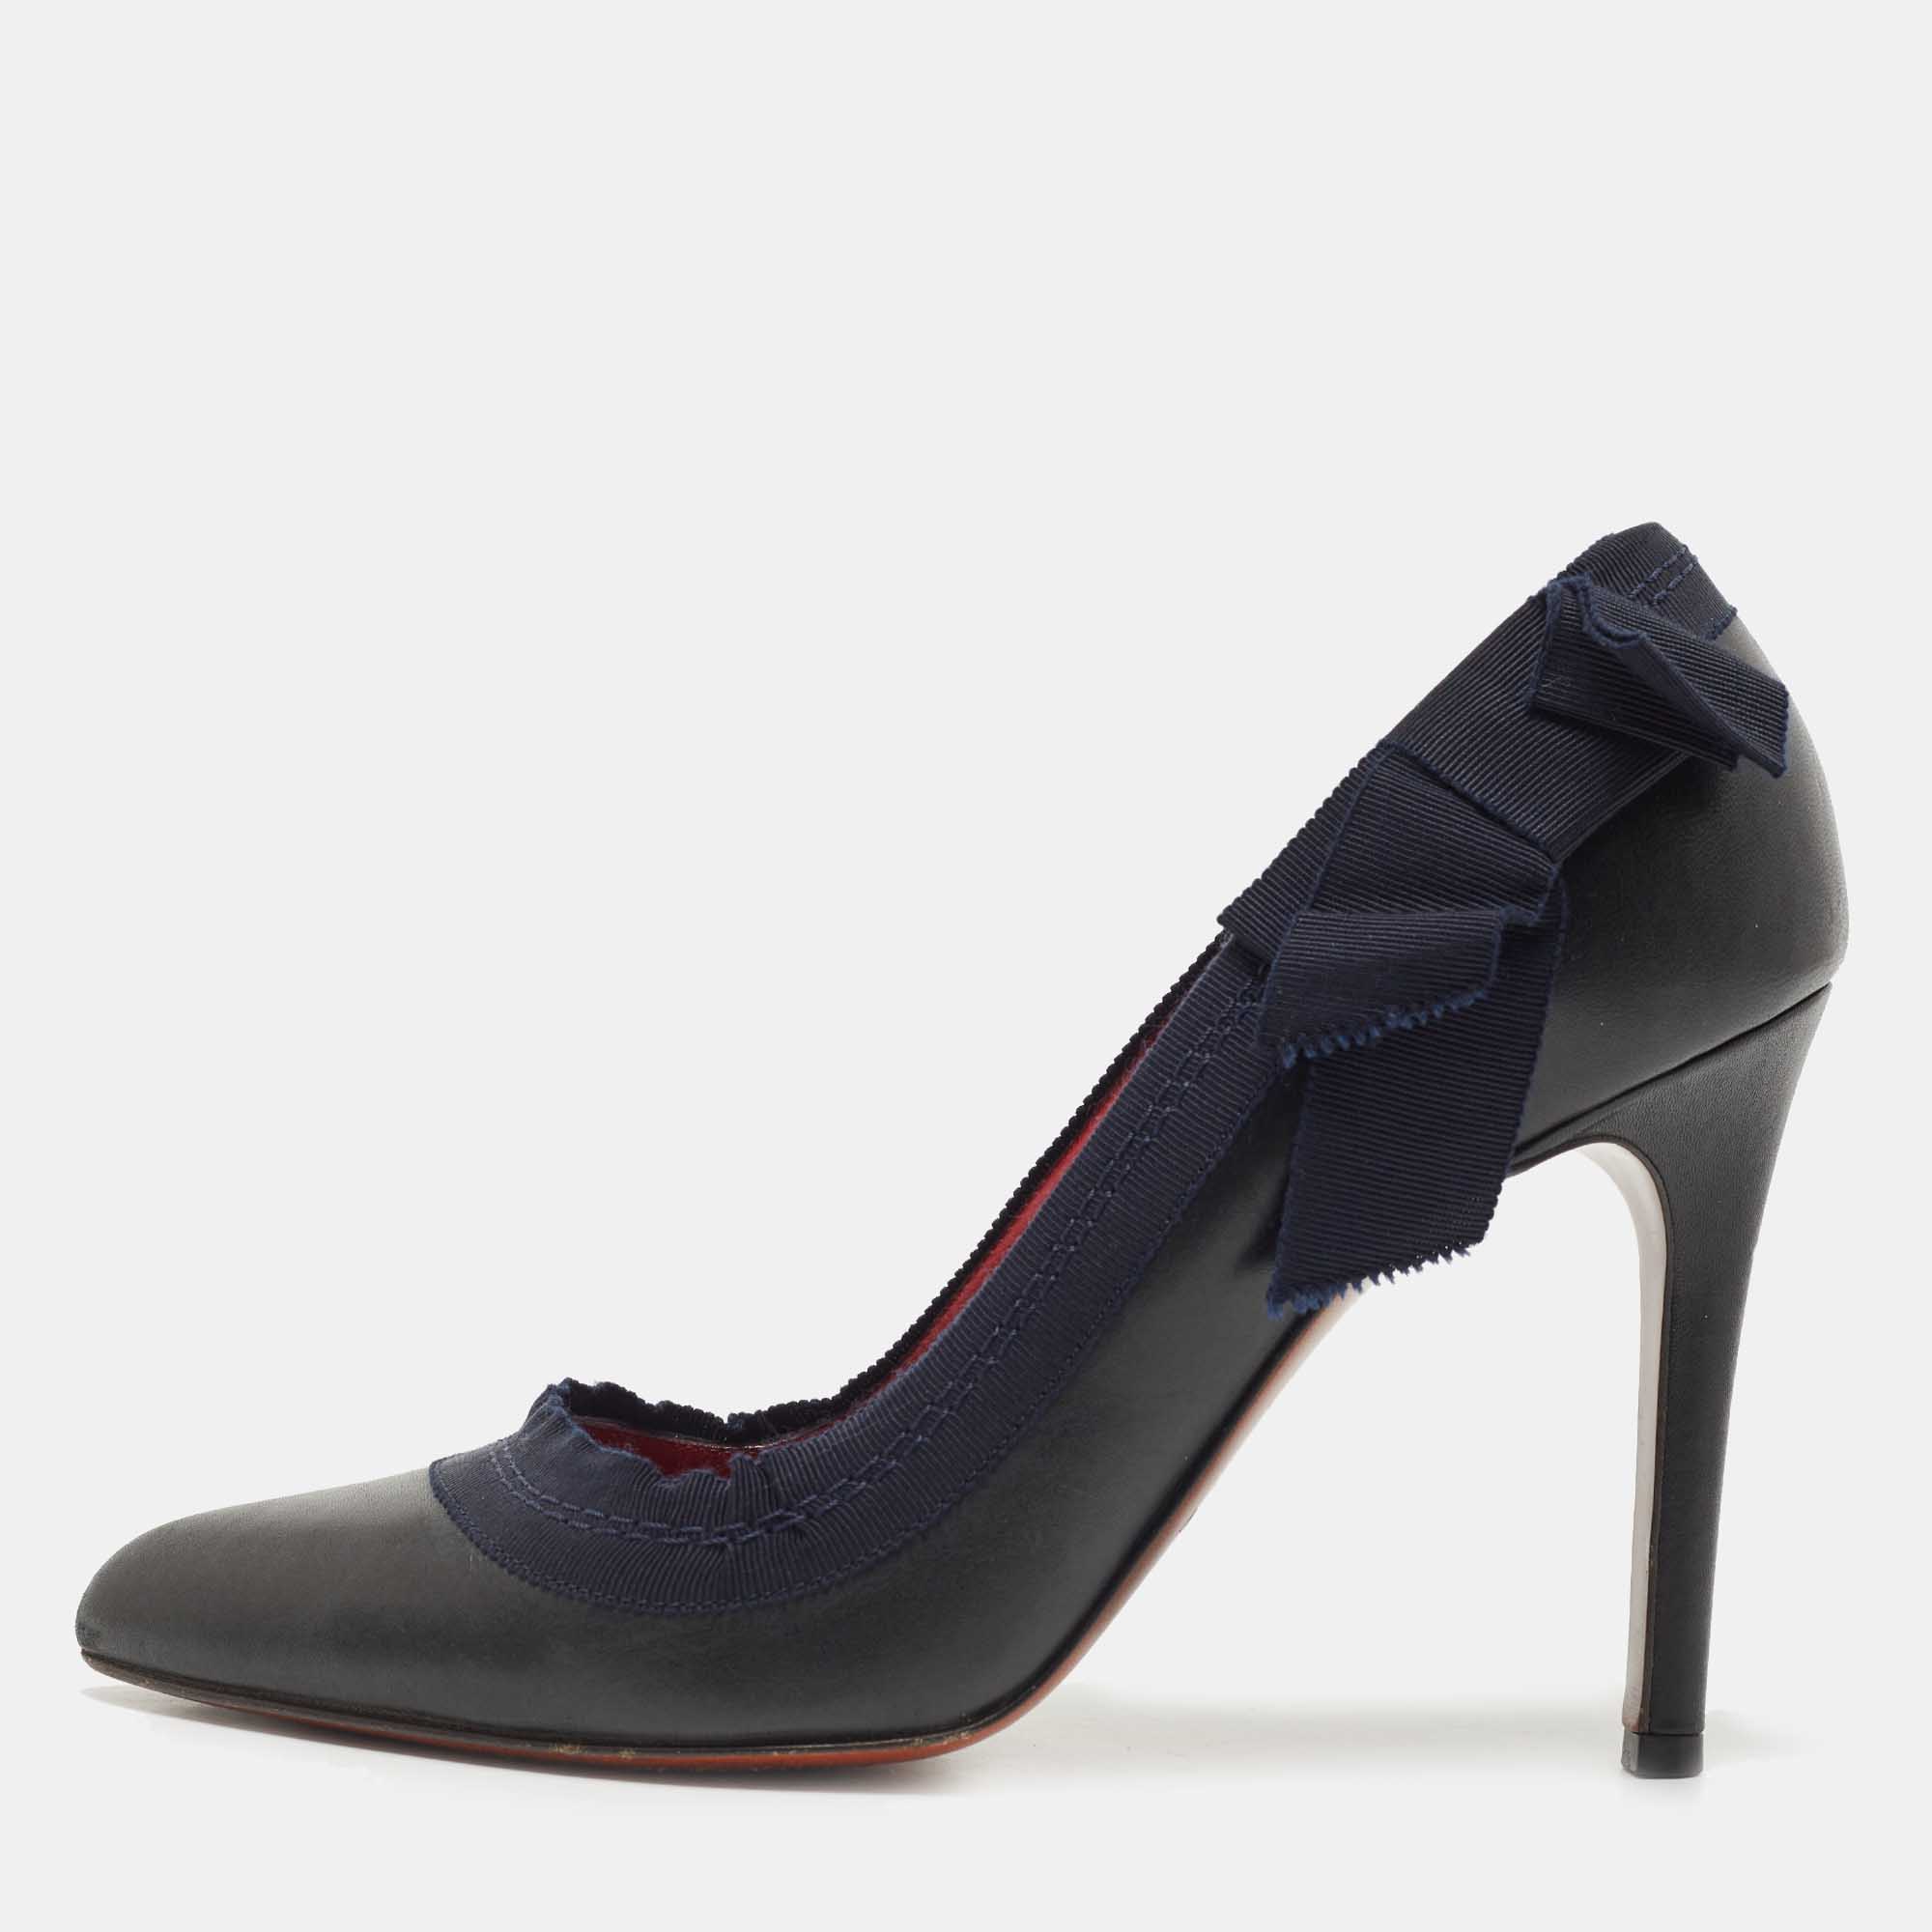 Lanvin Black/Navy Blue Leather And Ribbon Bow Pumps Size 38